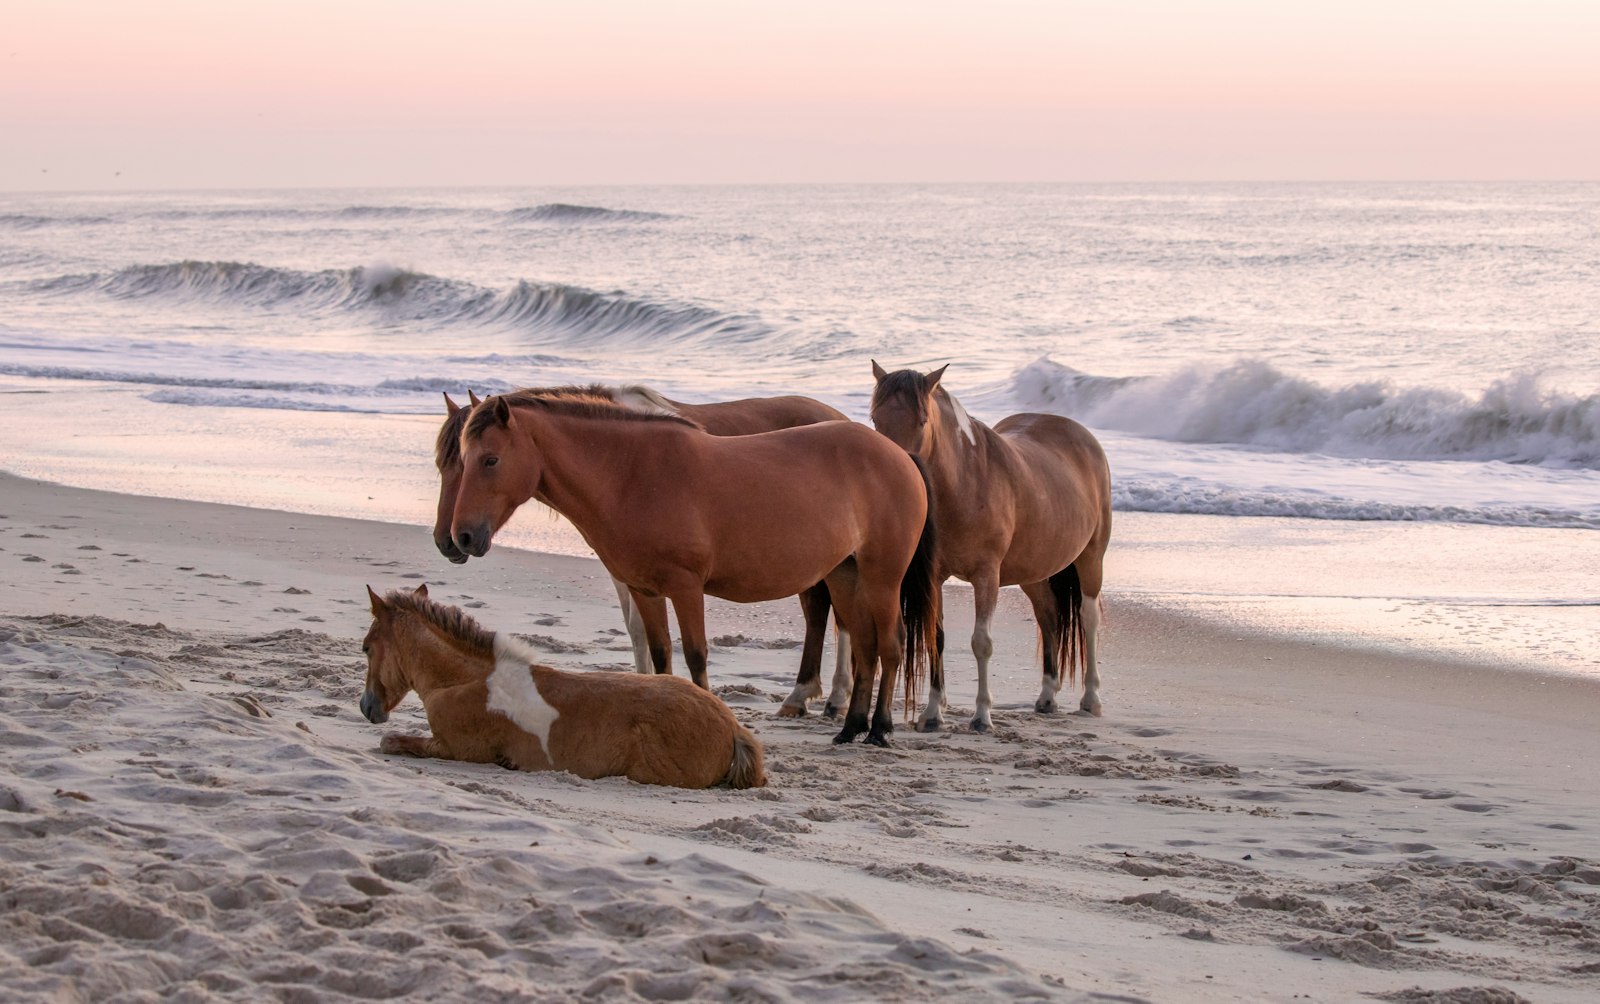 A group of four horses on a beach, one laying in the sand